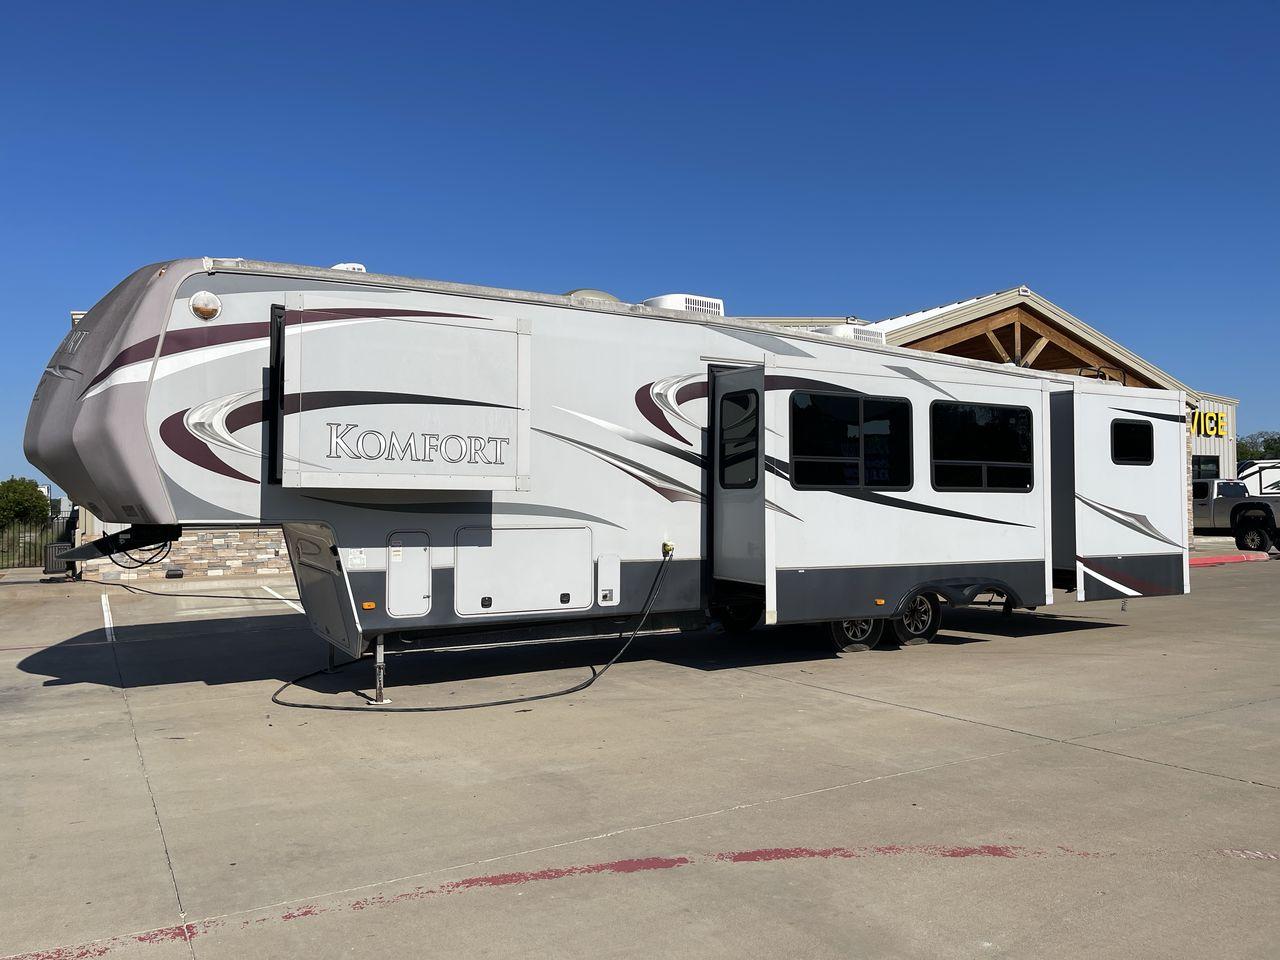 2011 GRAY DUTCHMEN KOMFORT 3530FBH (47CFKMV28BP) , Length: 40 ft | Dry Weight: 11,640 lbs | Slides: 3 transmission, located at 4319 N Main Street, Cleburne, TX, 76033, (817) 221-0660, 32.435829, -97.384178 - This 2011 Dutchmen Komfort Fifth Wheel is 40 feet long, over 12 feet tall, and weighs 11,640 lbs. It is a dual axel and has a hitch weight of 2,526 lbs. This model has 3 slides and 1 awning. The outside appearance of this unit is a white base color with deep brown decals and hints of red. It also ha - Photo #23